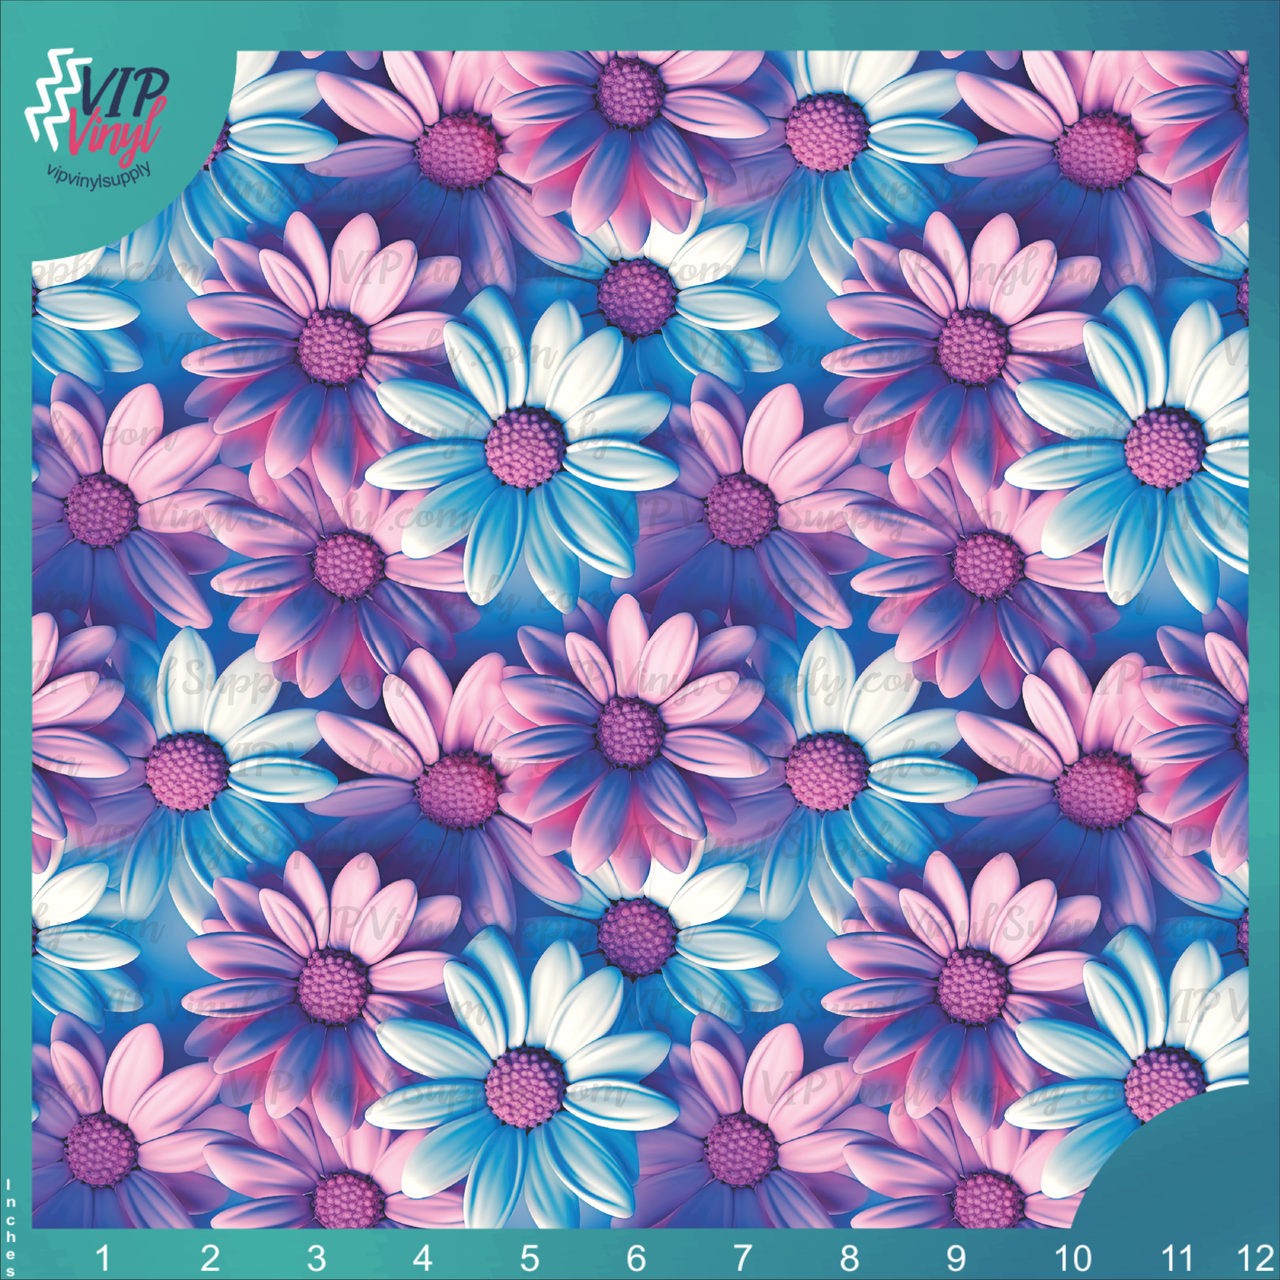 3D Floral Daisy Printed Vinyl, HTV or Sublimation Sheets